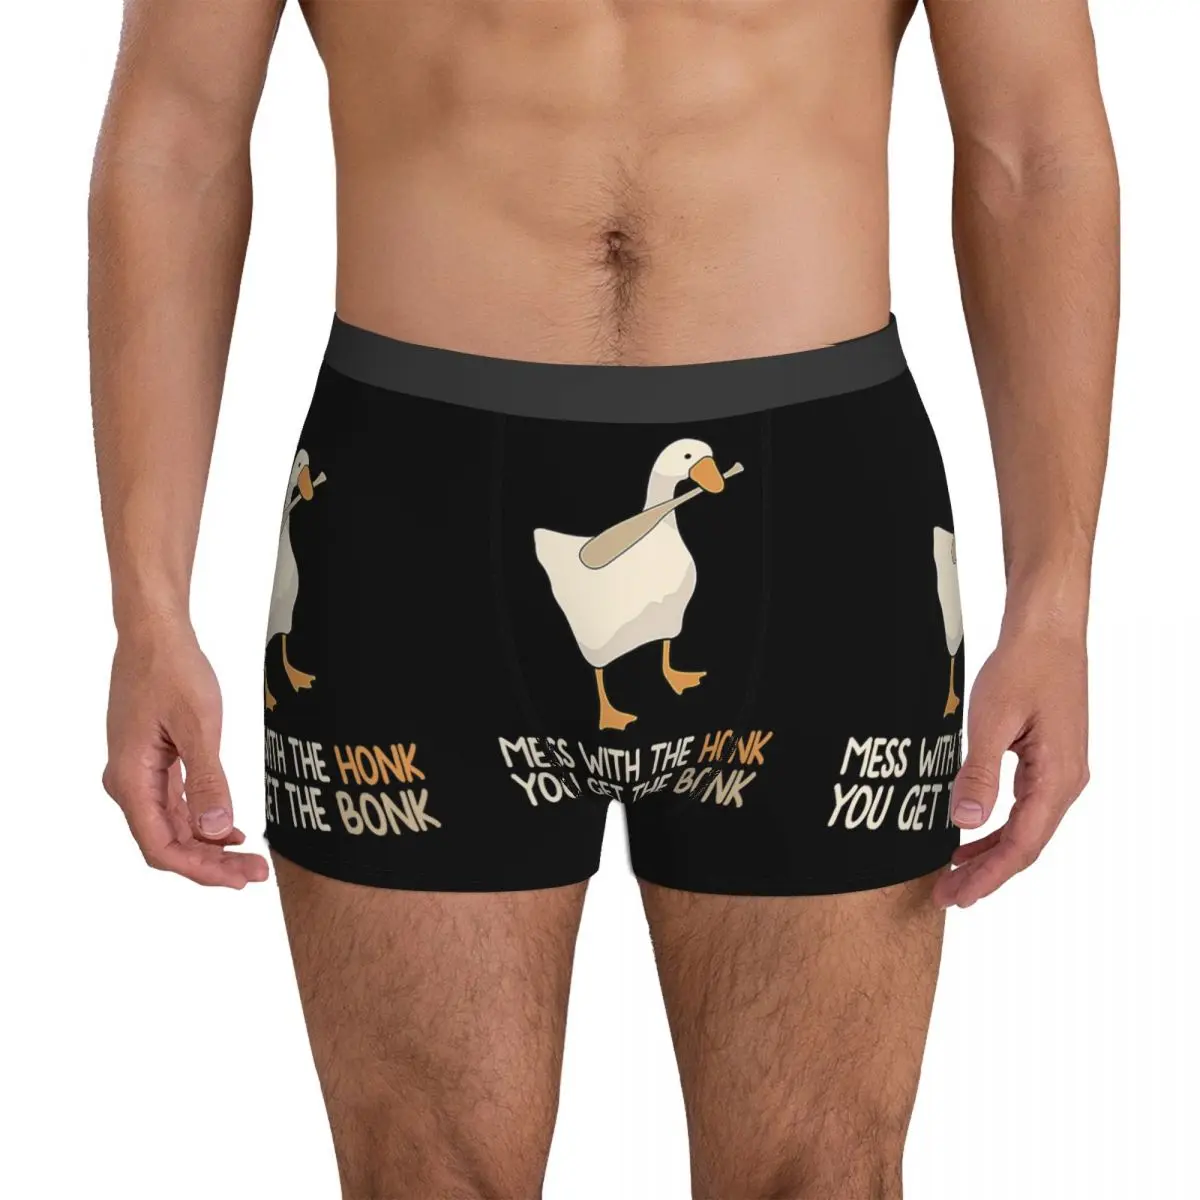 You Get The Bonk Underwear Untitled Goose Game gaming animal 3D Pouch High Quality Trunk Sublimation Shorts Briefs Classic